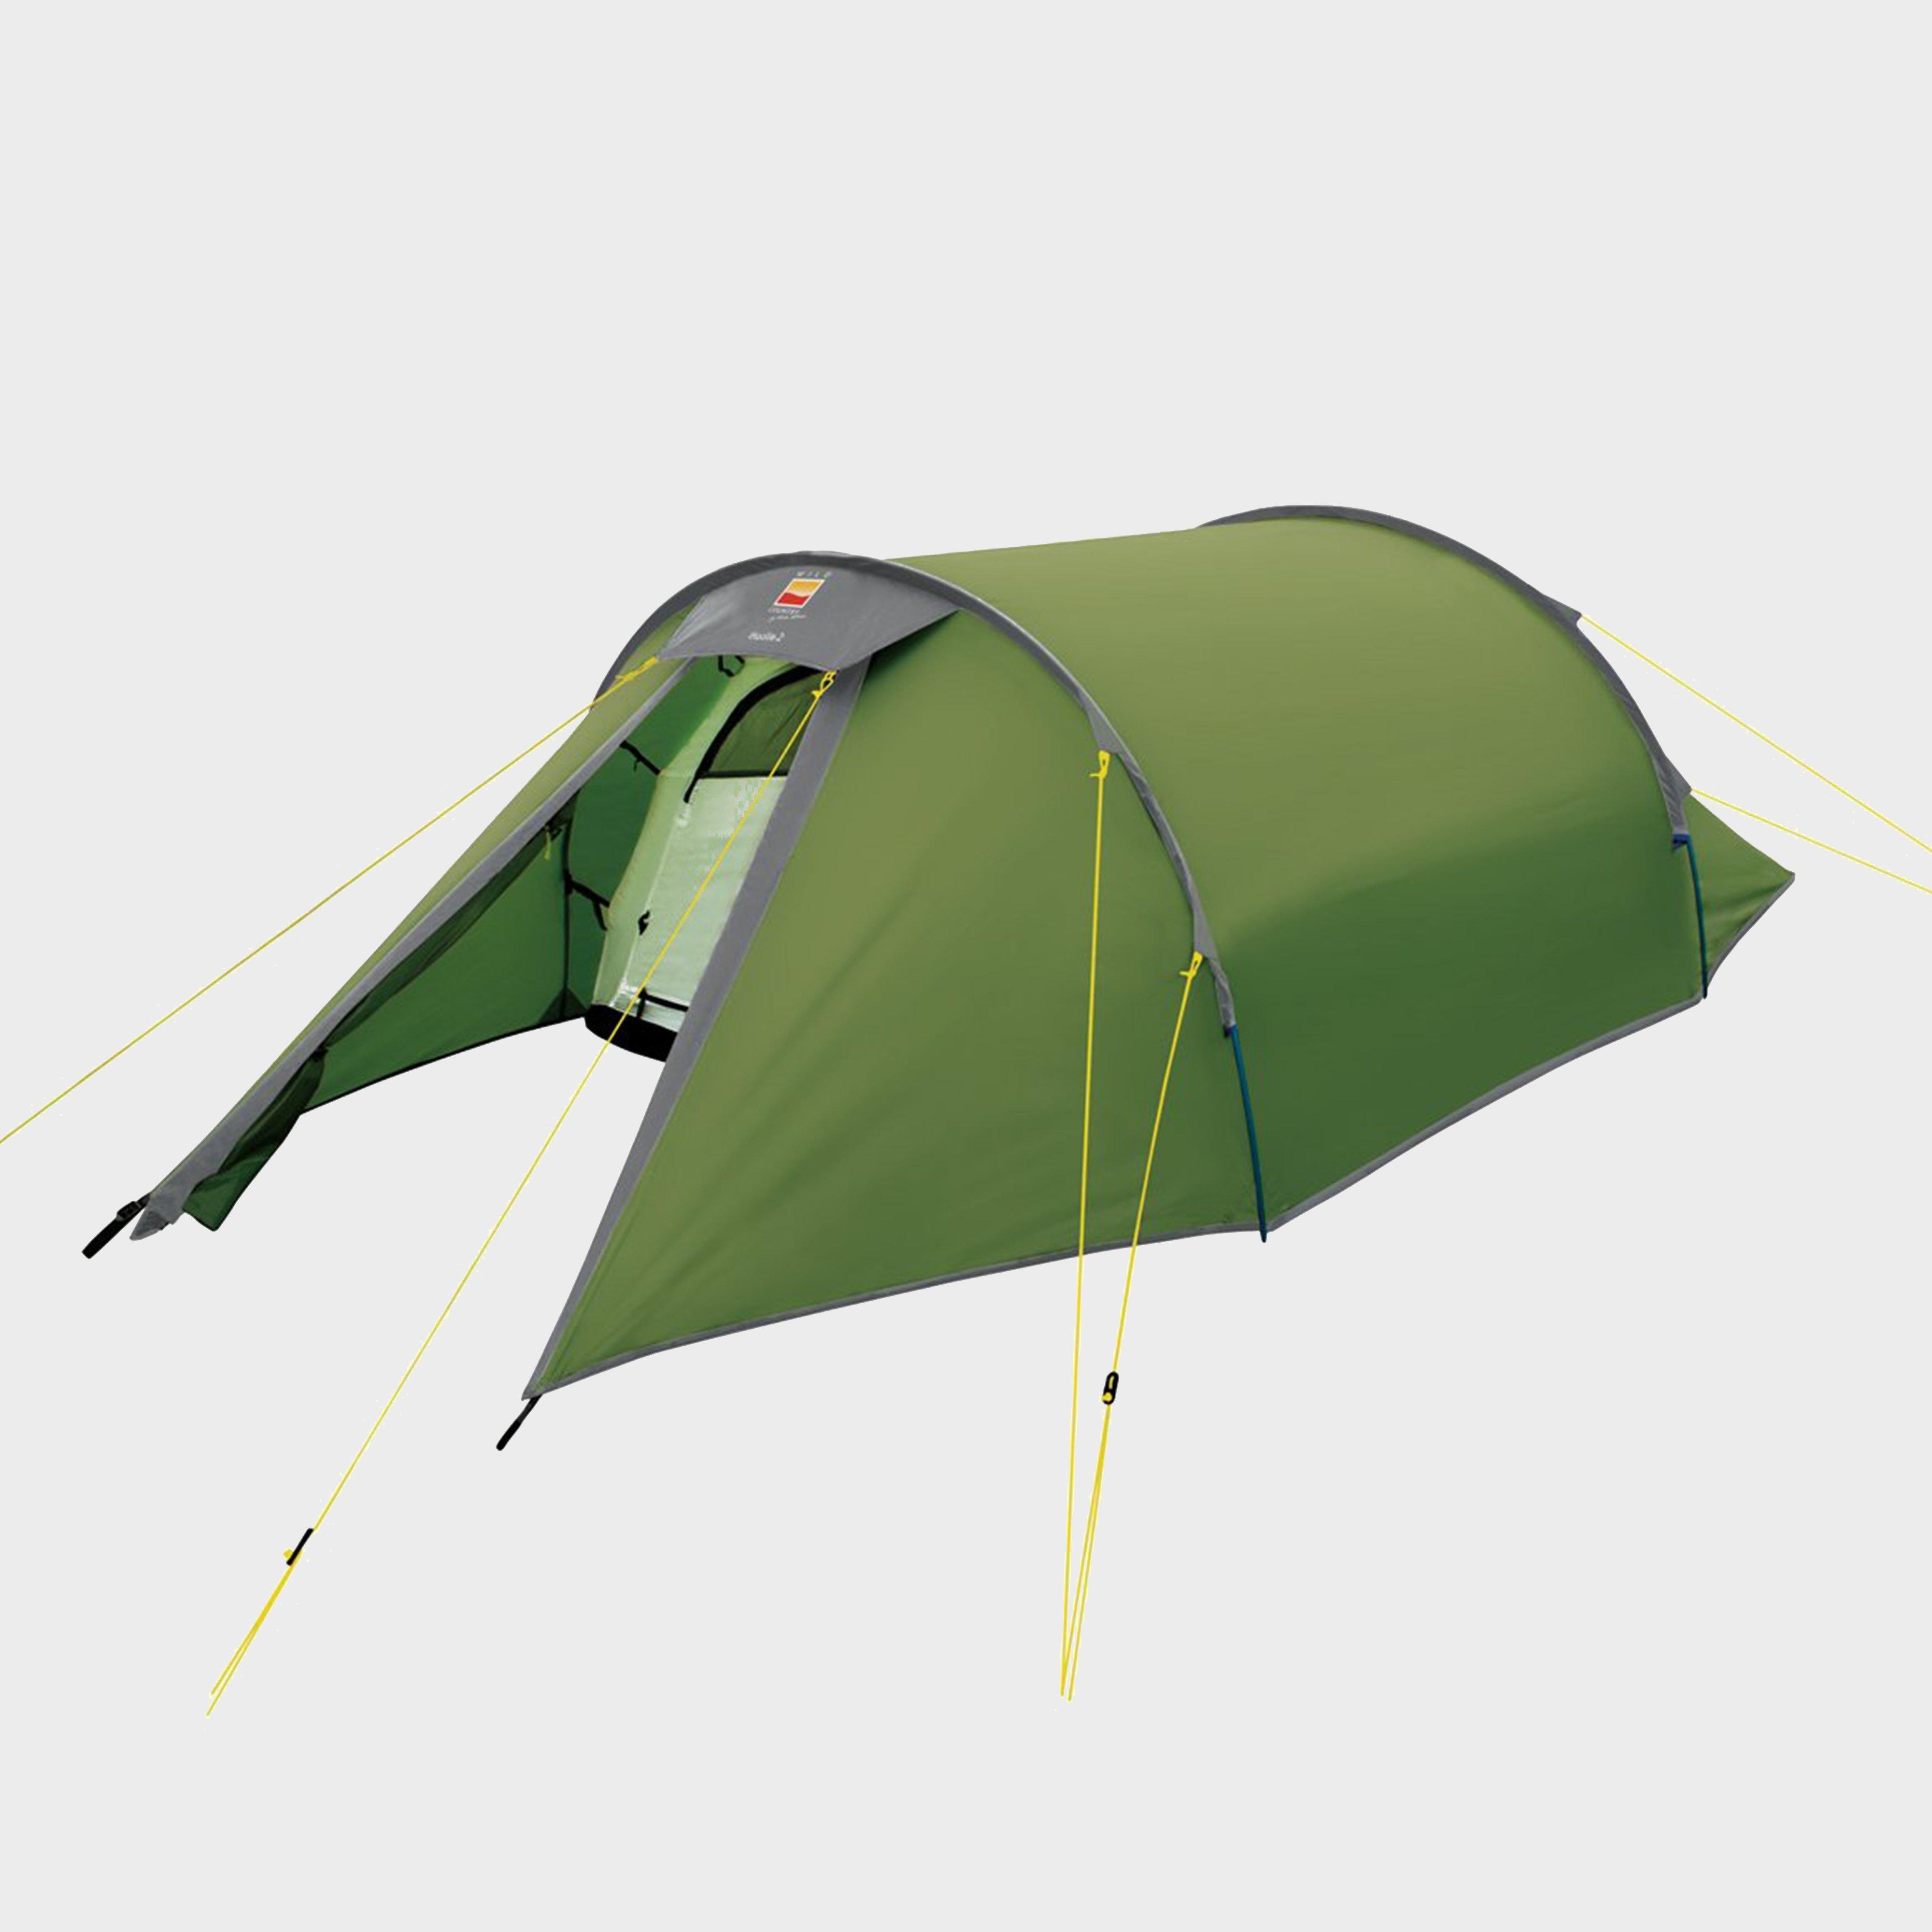 Wild Country Wild Country Hoolie Compact 2 Tent - Green, Green